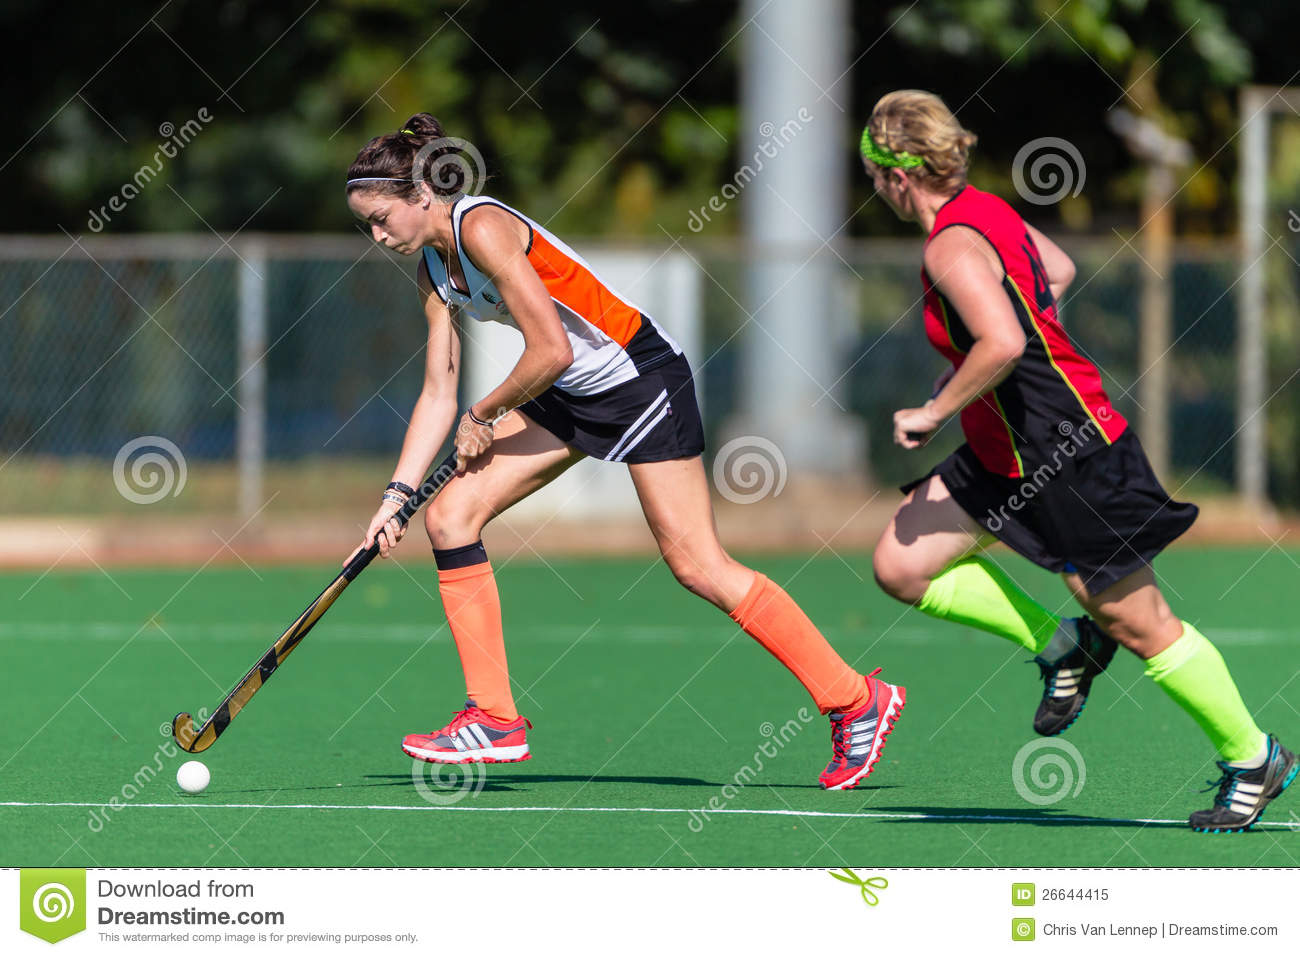 Girls Hockey Game Action Astro Editorial Image   Image  26644415